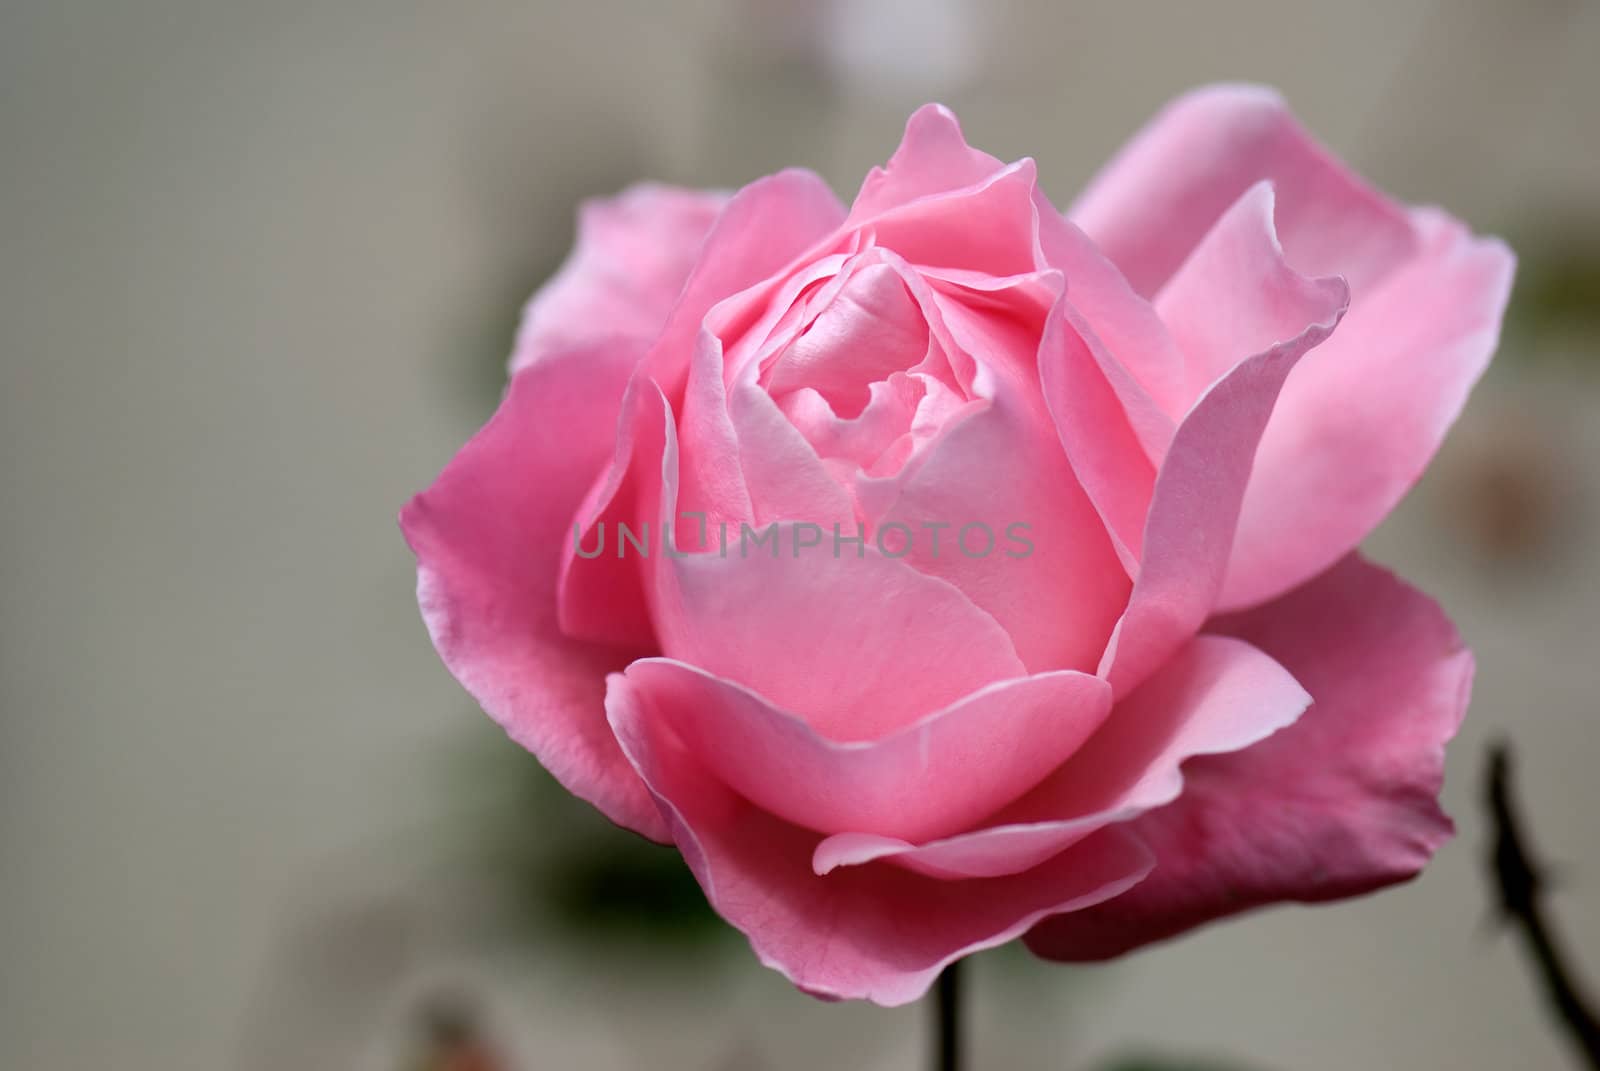 A Macro image of a delicate pink rose.